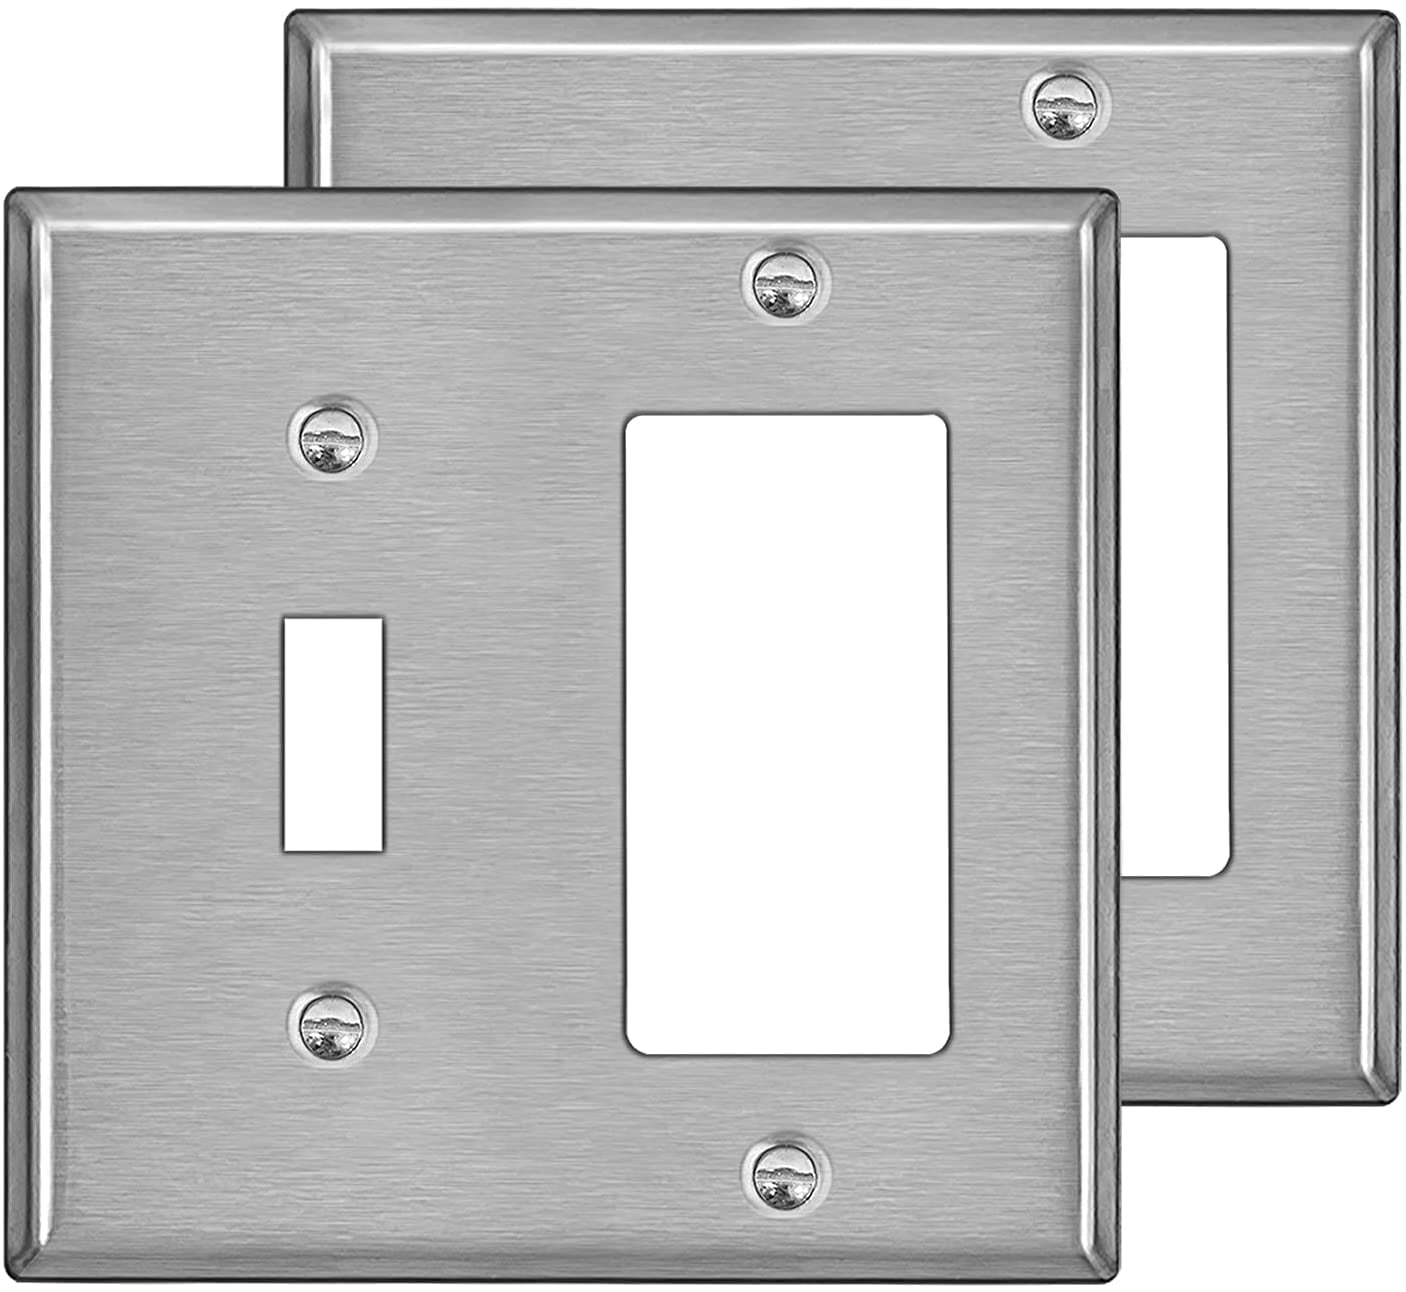 H4.69” x W11.75” Dimmer USB Receptacle BESTTEN 6-Gang Screwless Wall Plate Decorator Outlet Cover USWP6 Snow White Decorator Outlet Cover for Light Switch GFCI